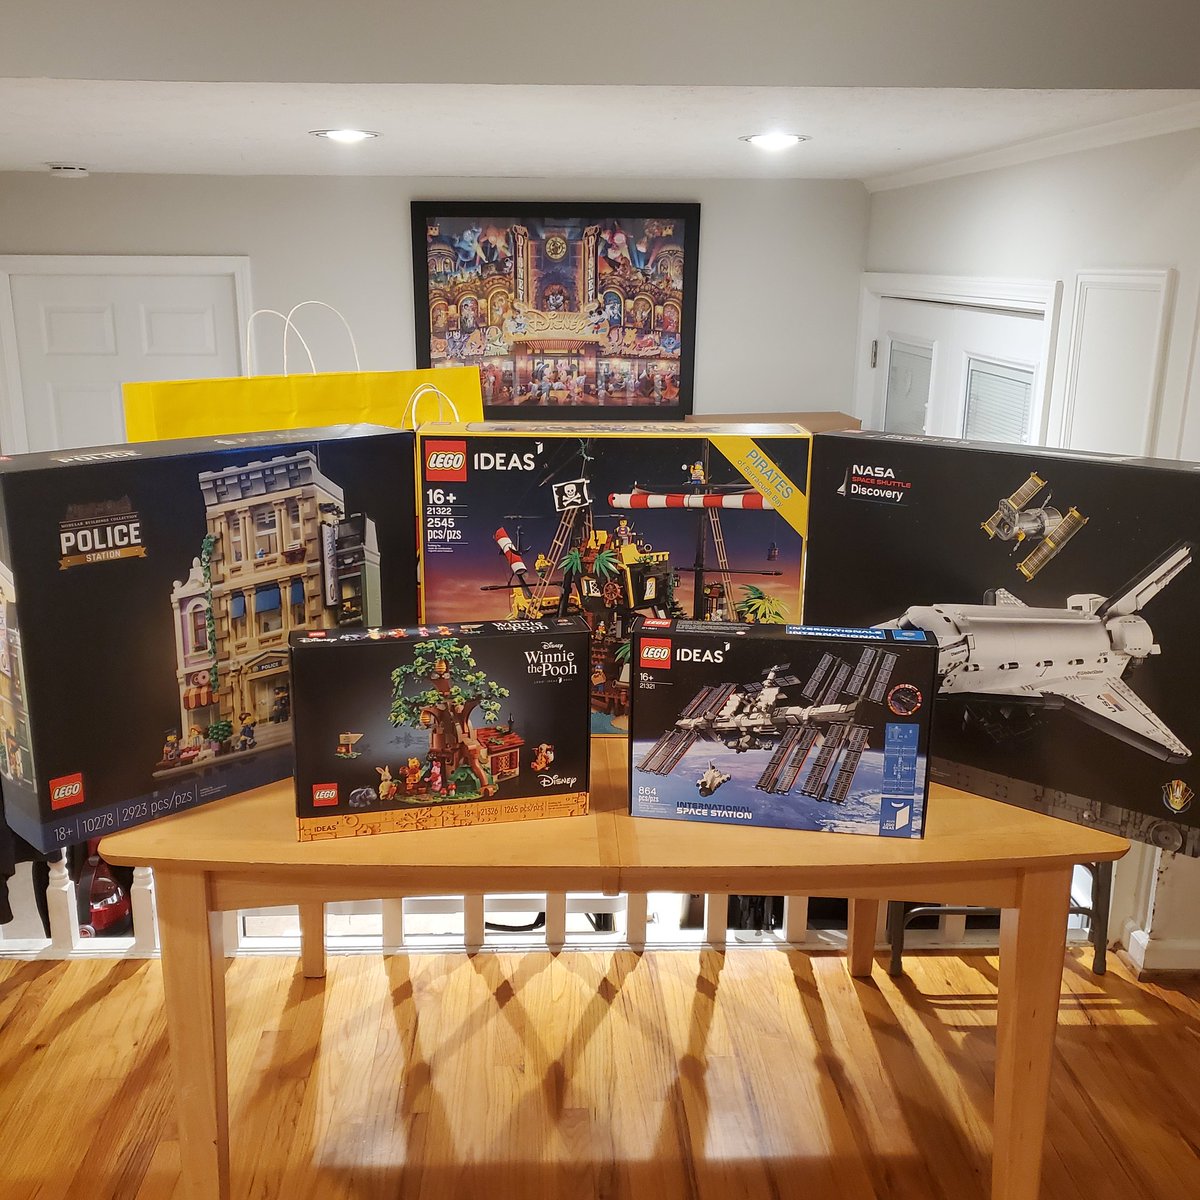 So the roommates and I decided to buy some lego sets to build this weekend and it's Wrestlemania weekend. I'm so looking forward to this lol #LegoParty